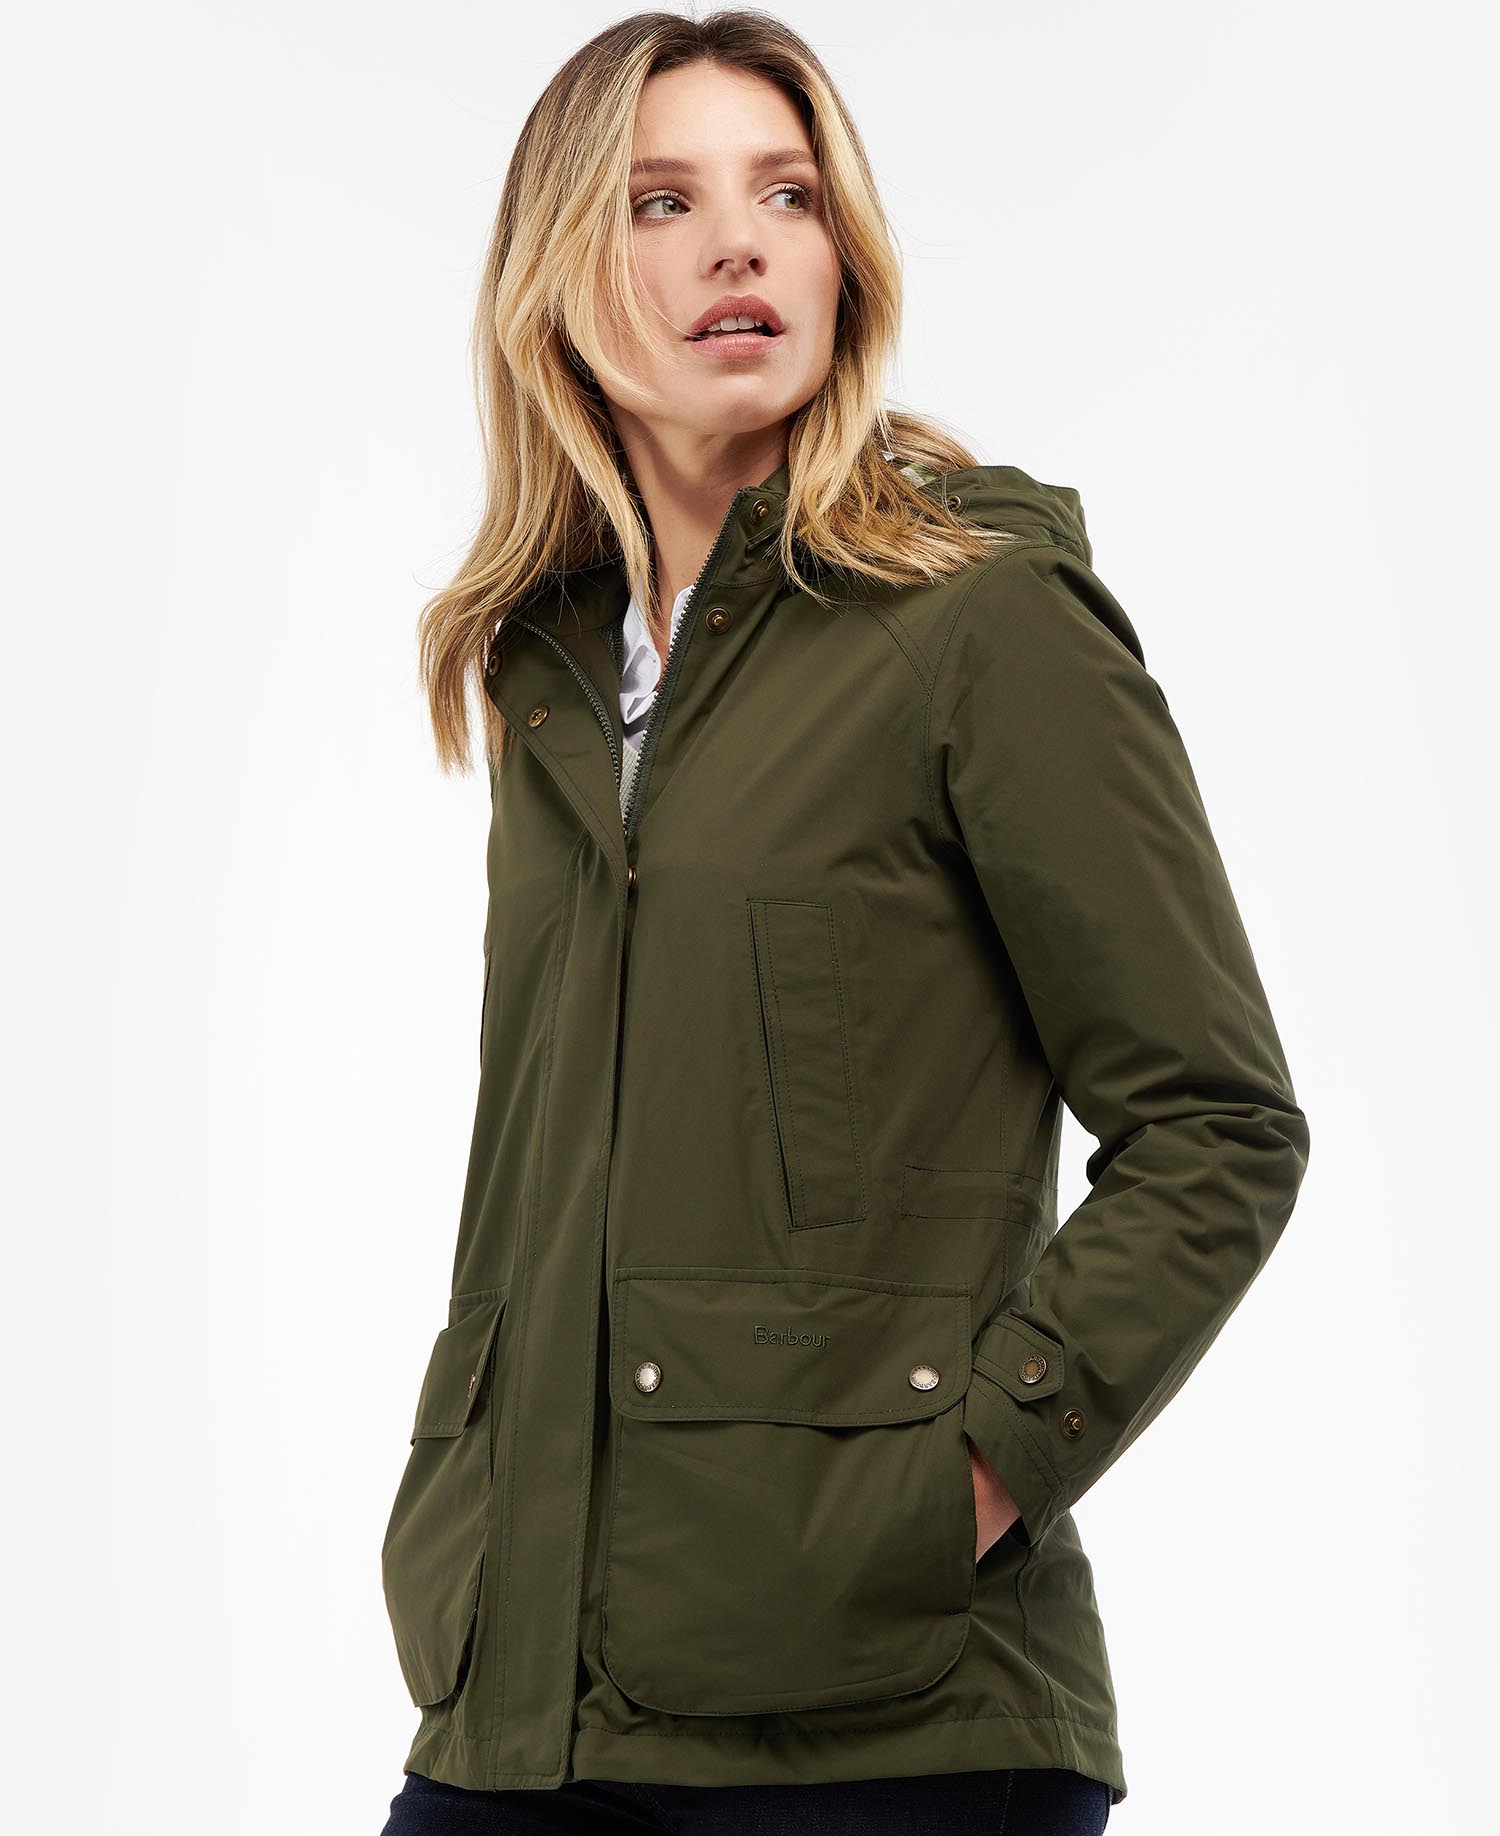 Shop the Barbour Clyde Jacket here at Barbour. | Barbour